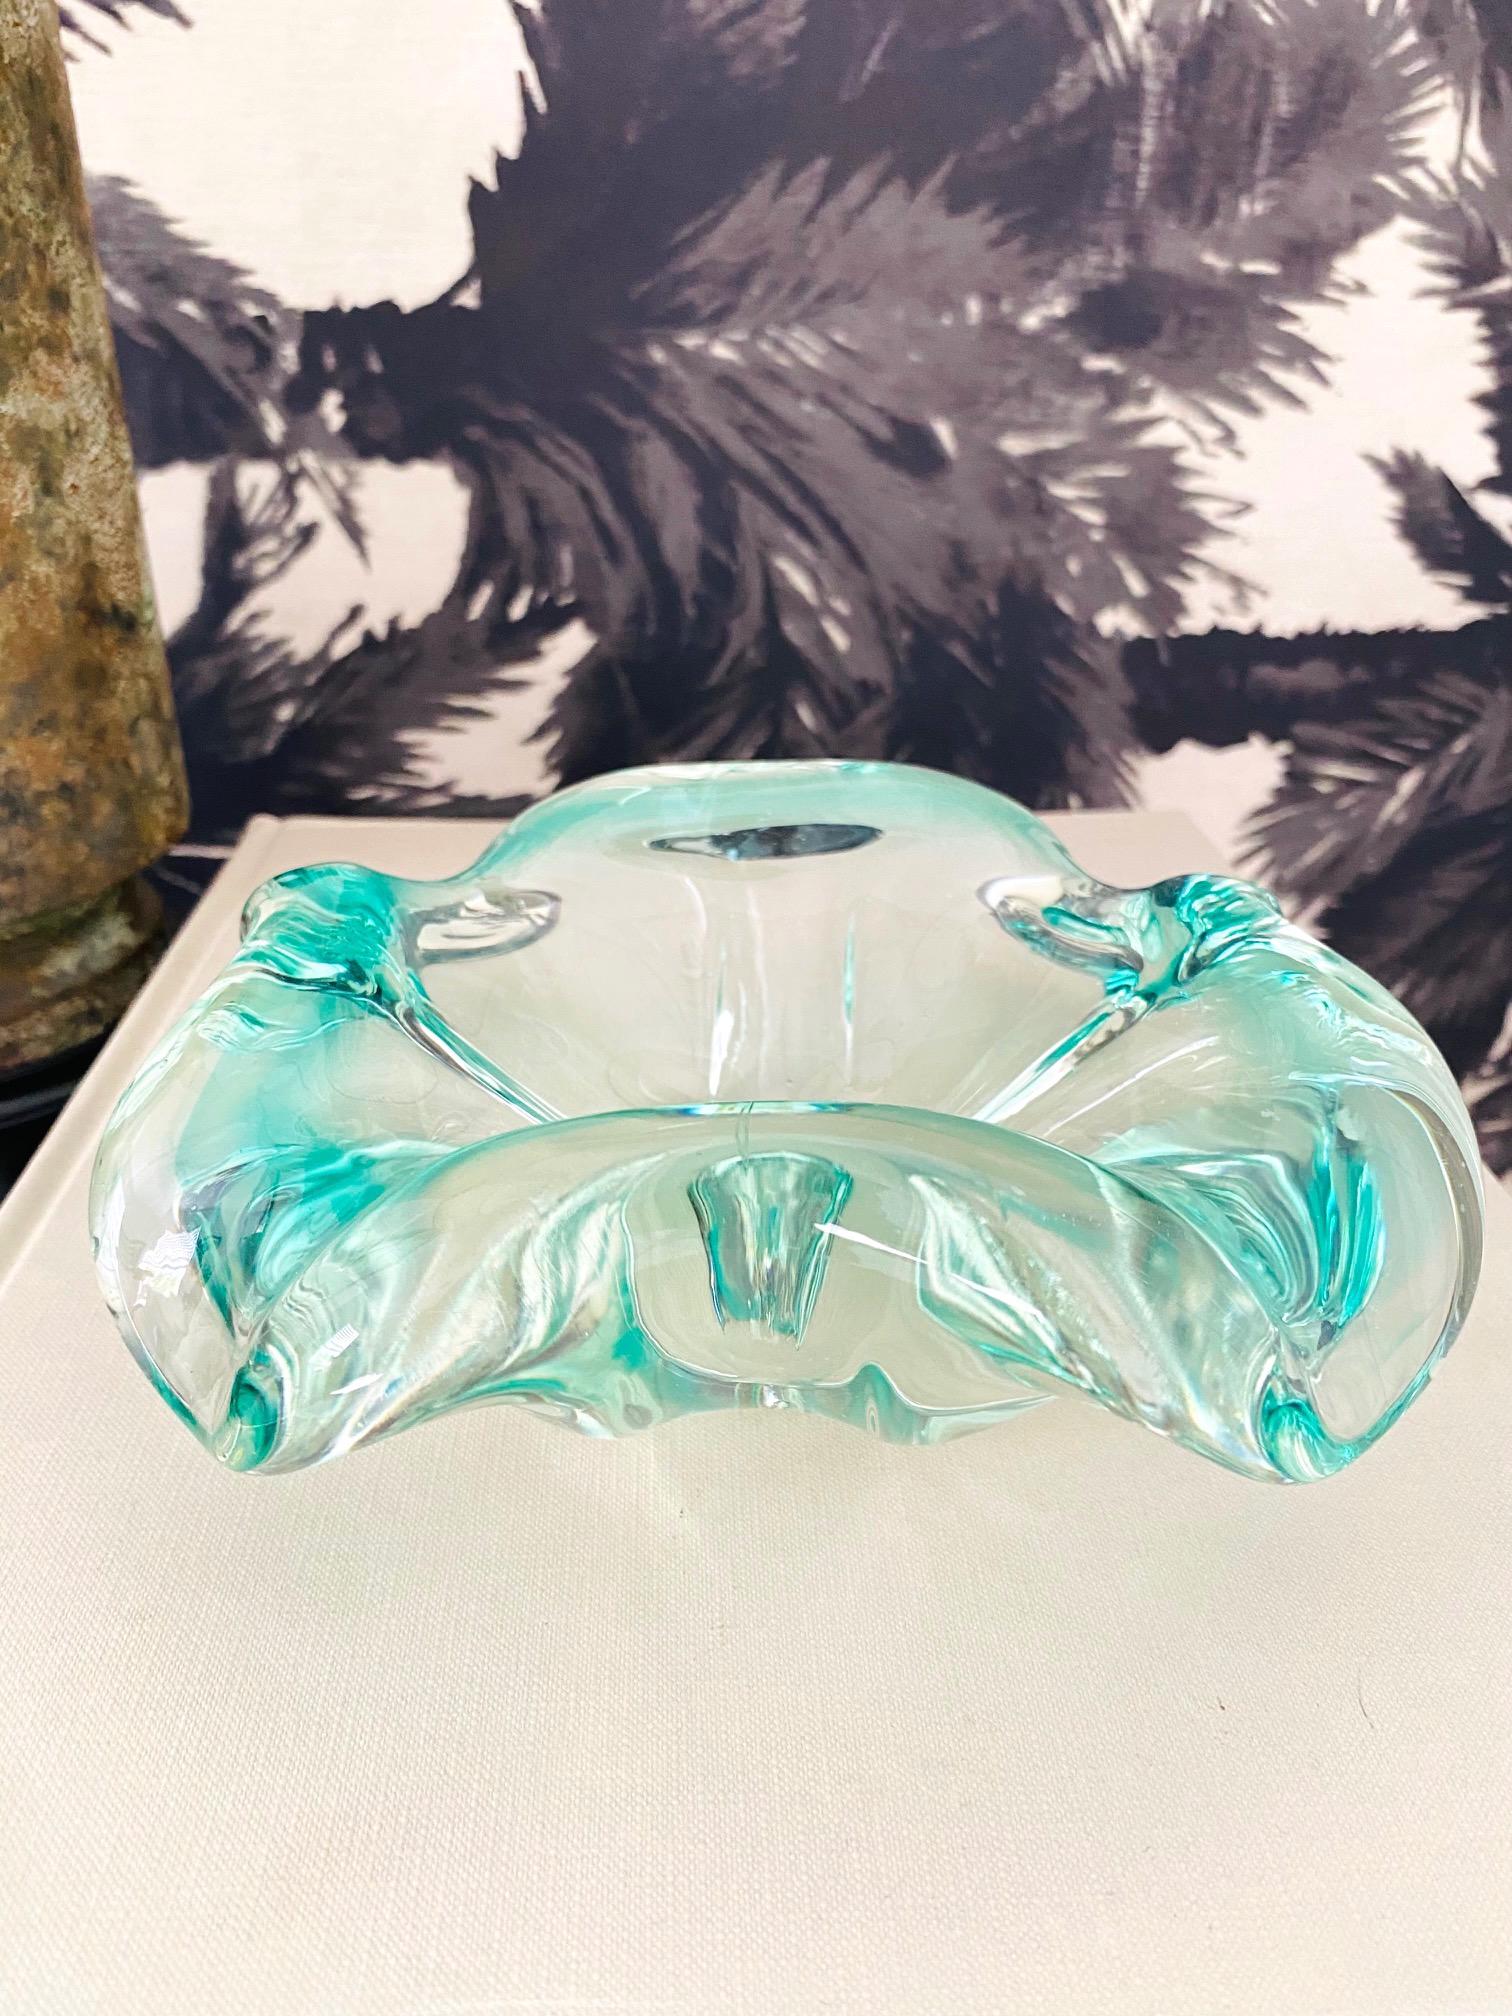 Hand-Crafted Seguso Murano Glass Bowl or Ashtray in Aqua, Italy, c. 1950s